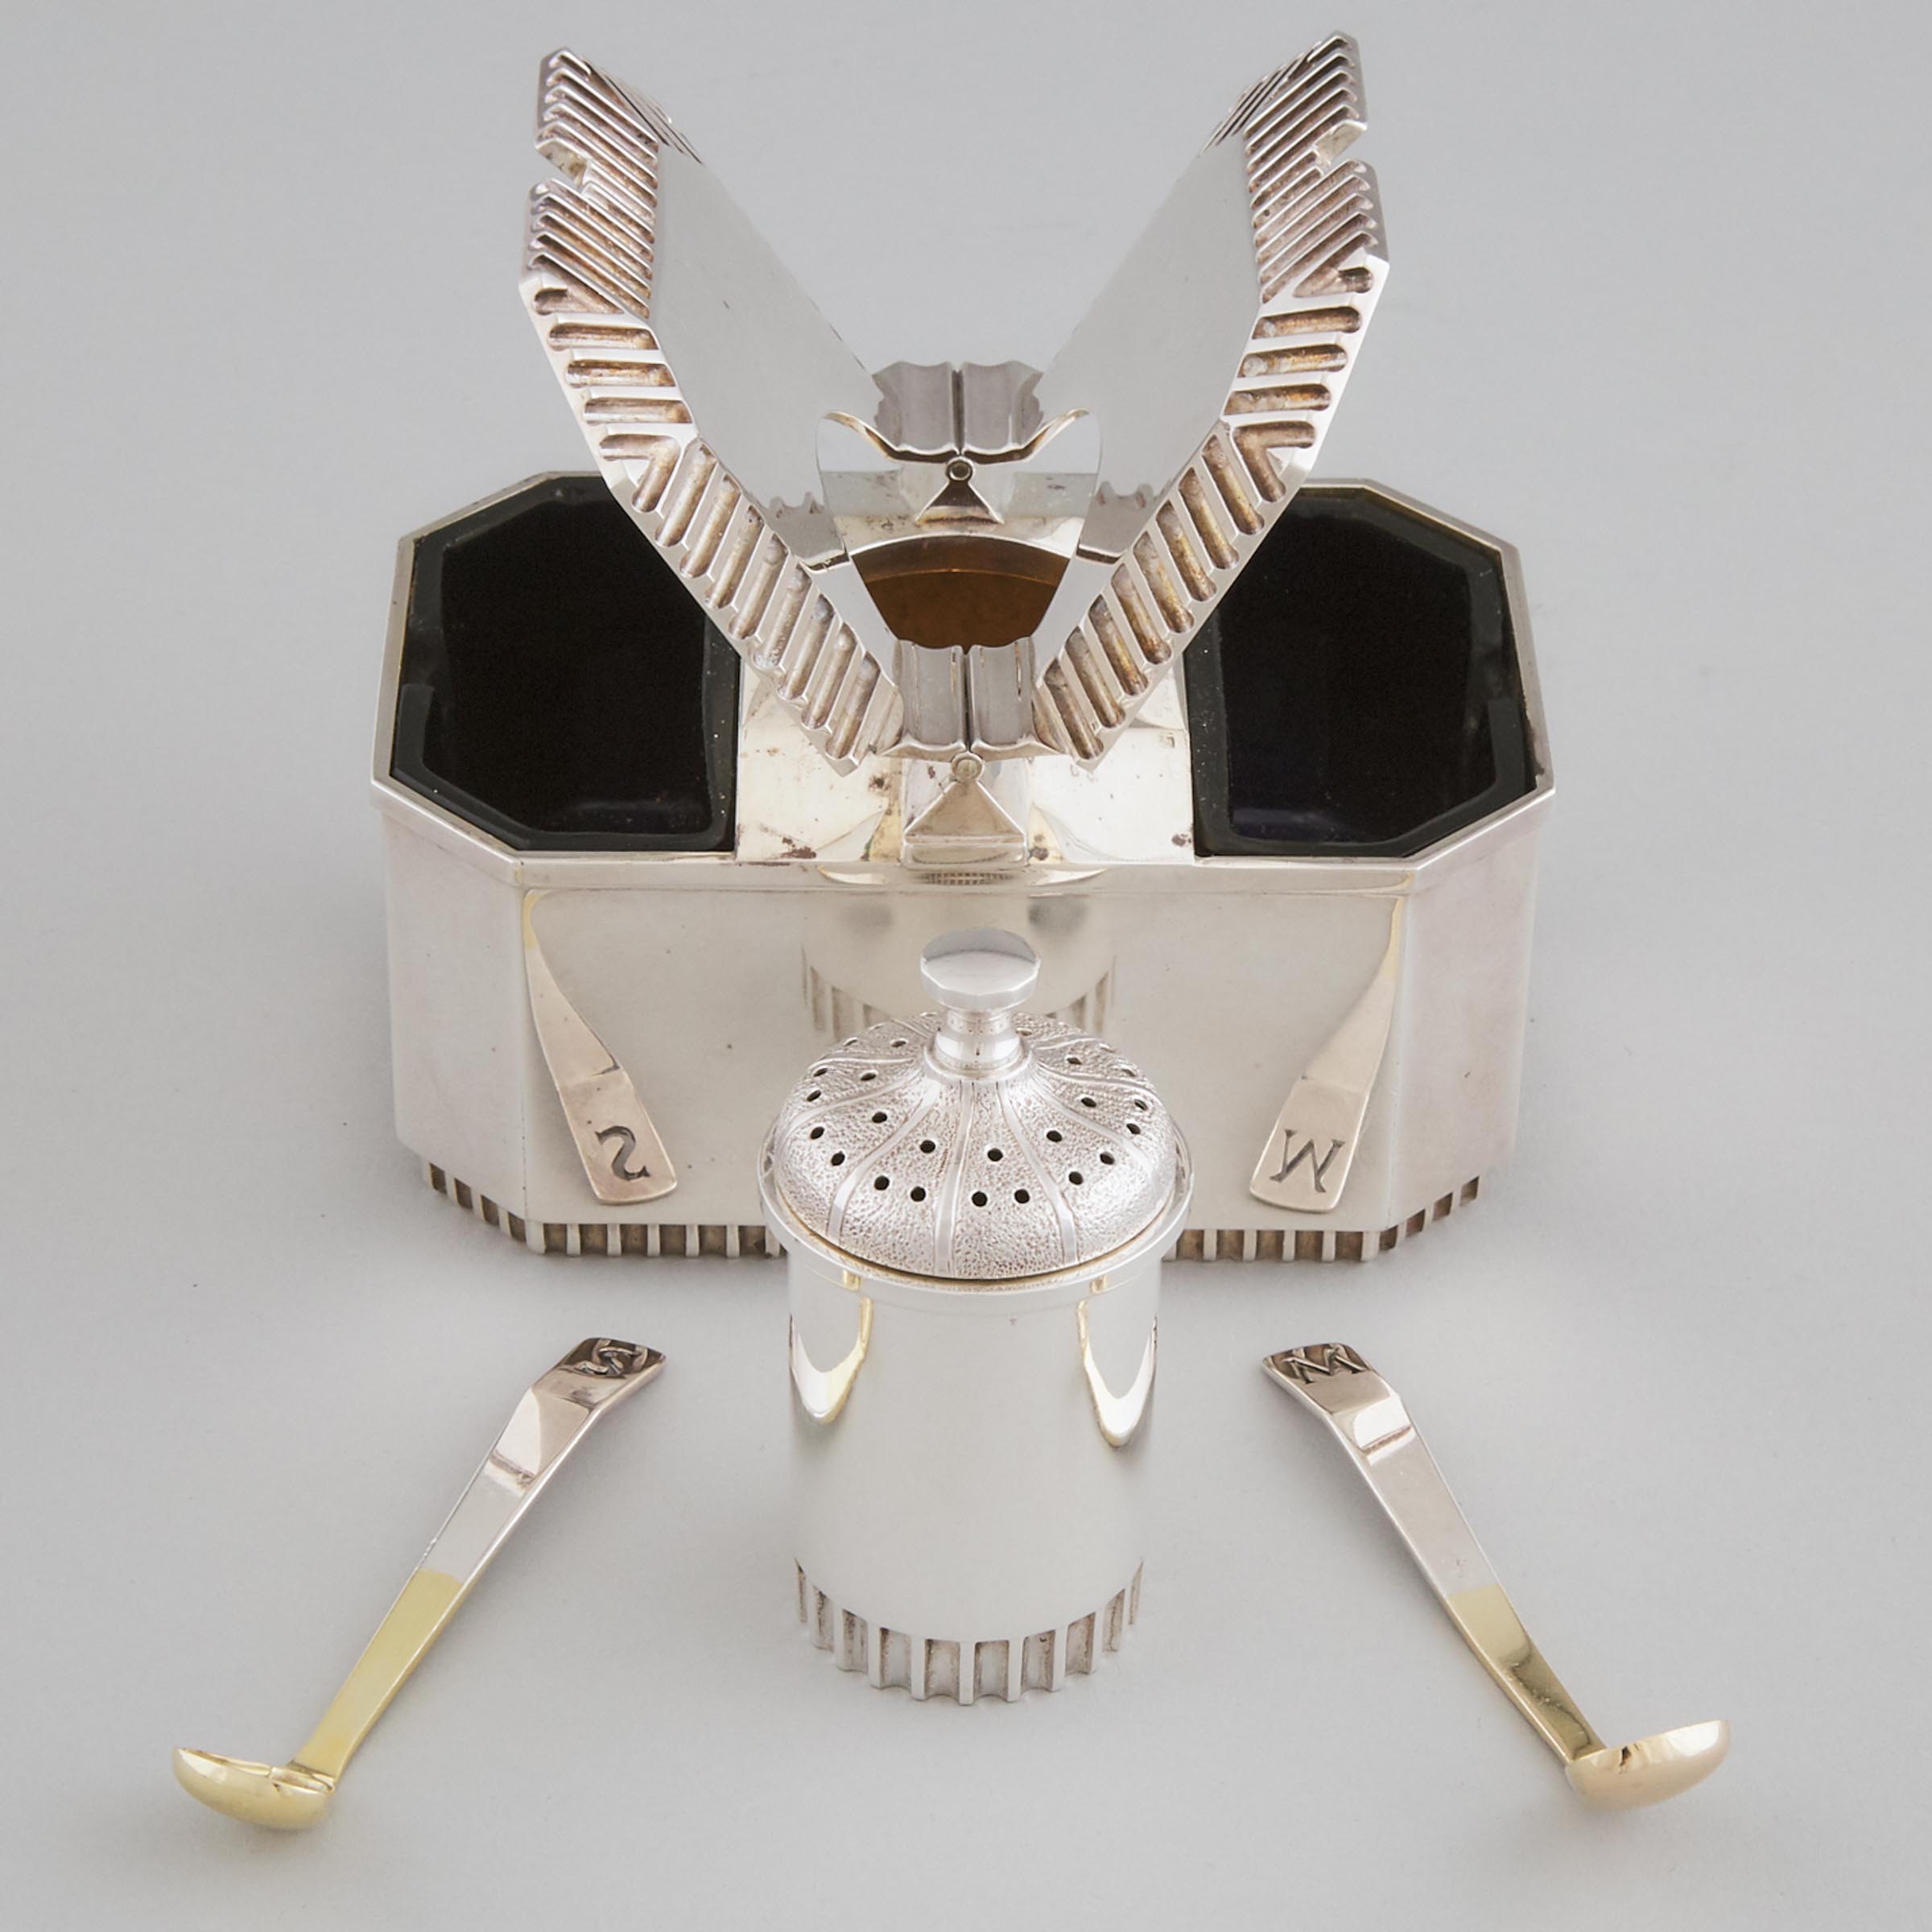 English Silver Condiment Cruet, Anthony Elson for Hennell, Frazer & Haws, London, 1970